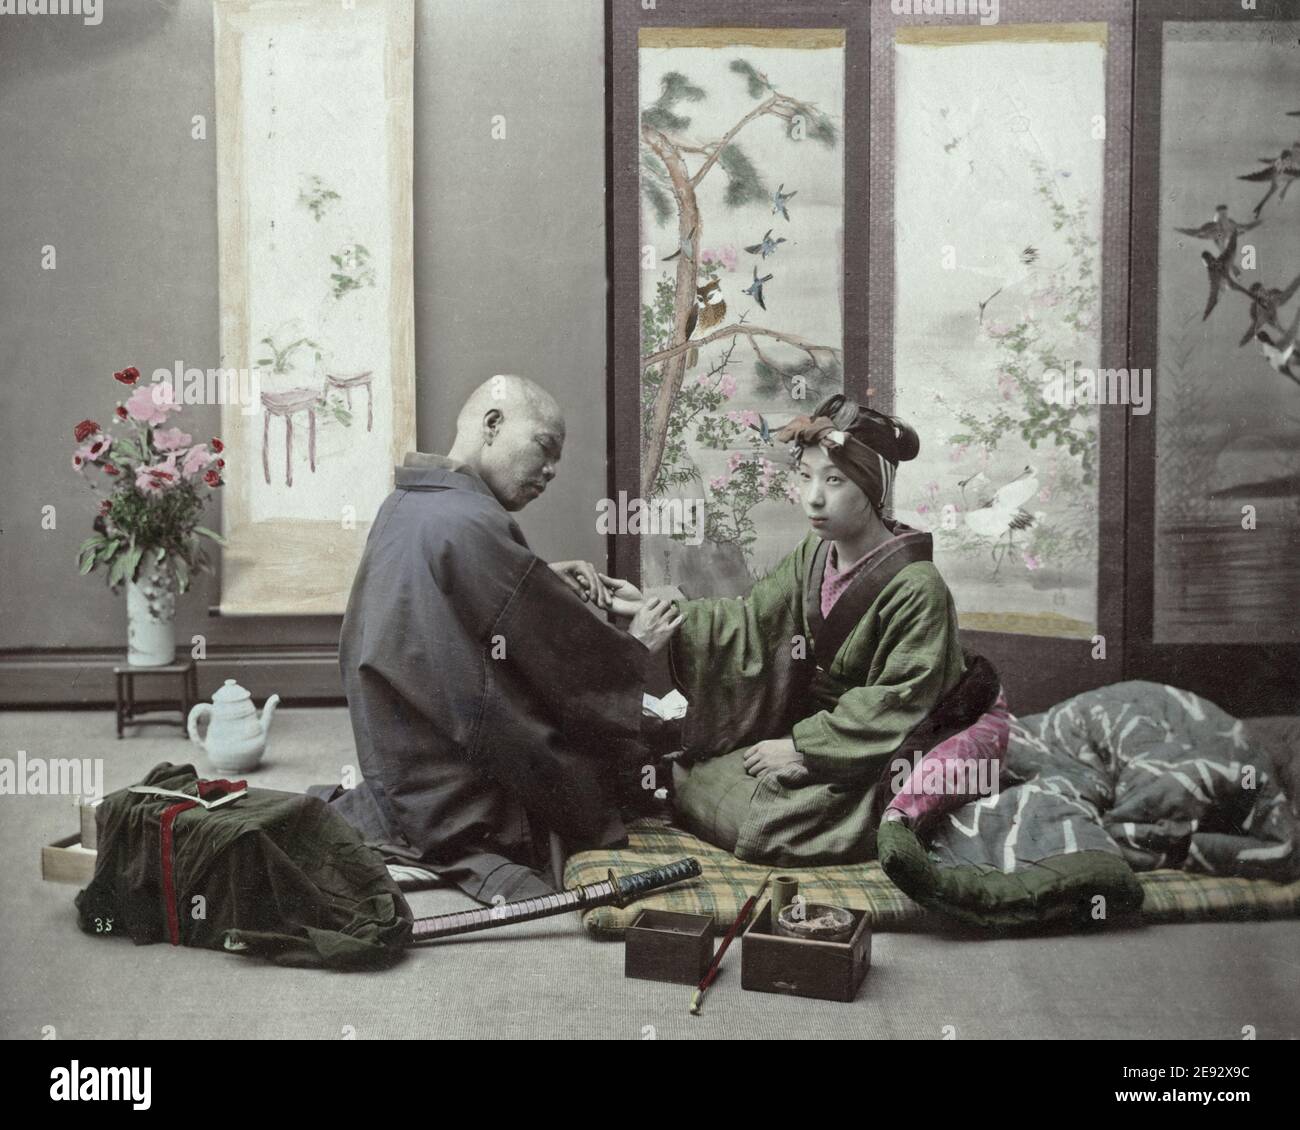 Late 19th century photograph - Doctor and patient, Japan Stock Photo